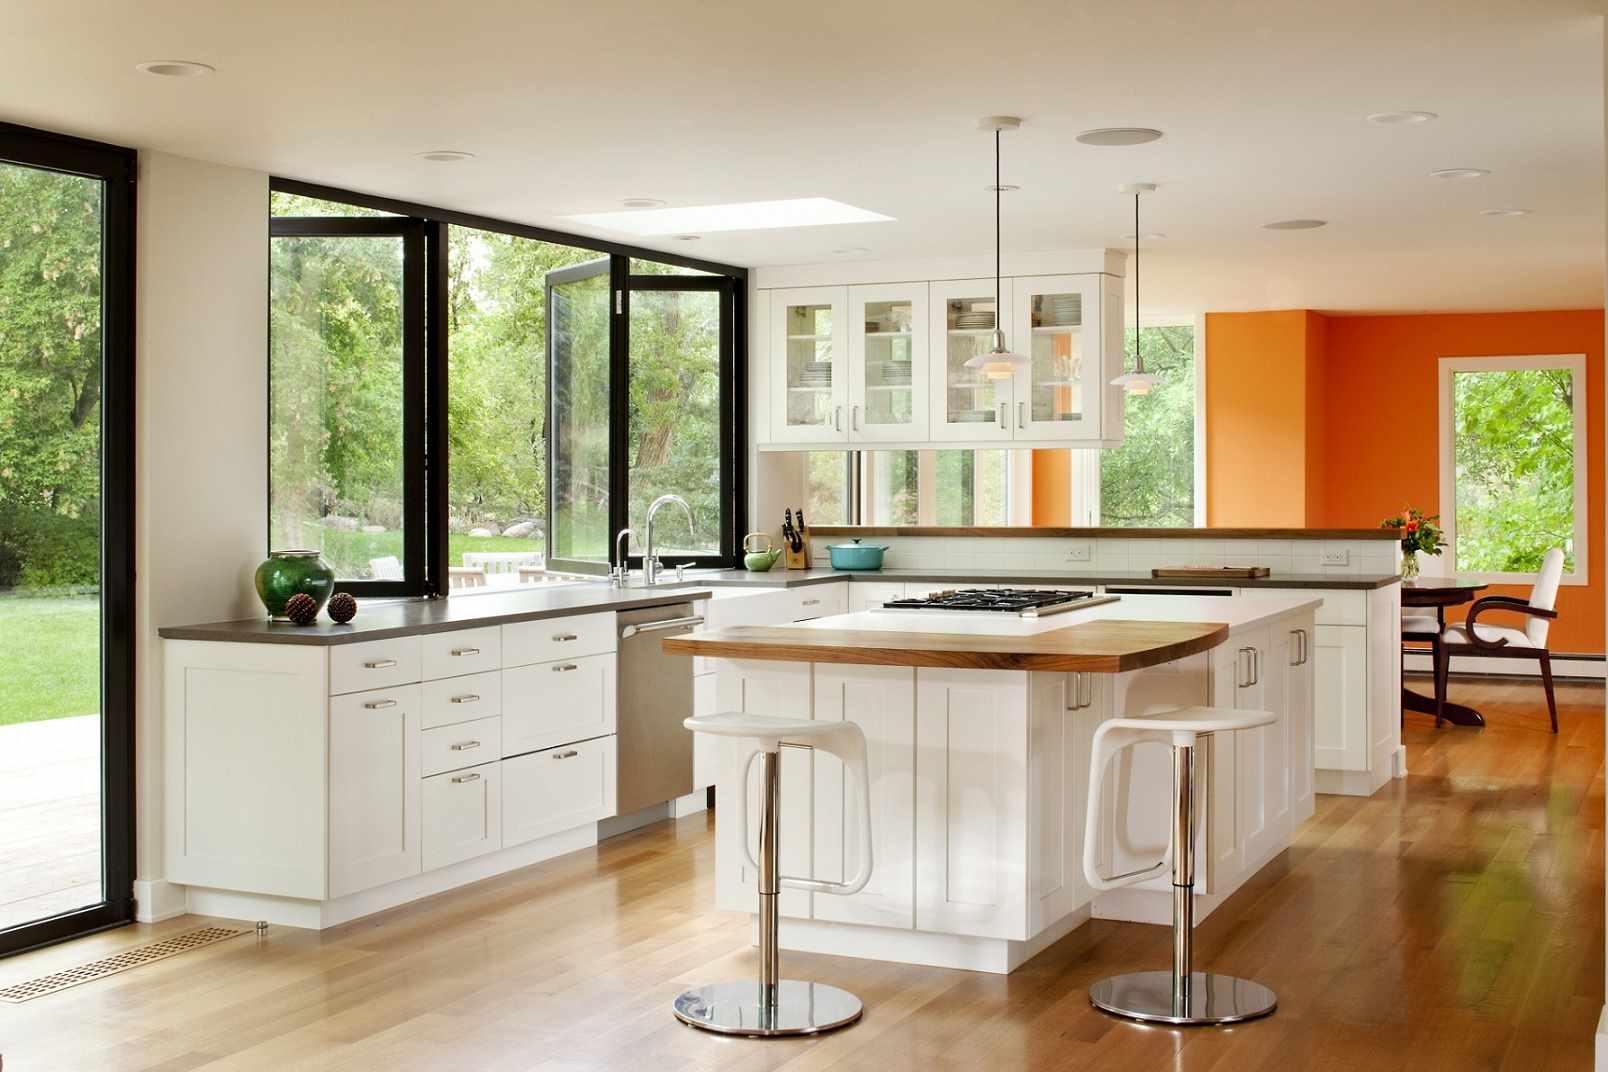 the idea of ​​a light window design in the kitchen